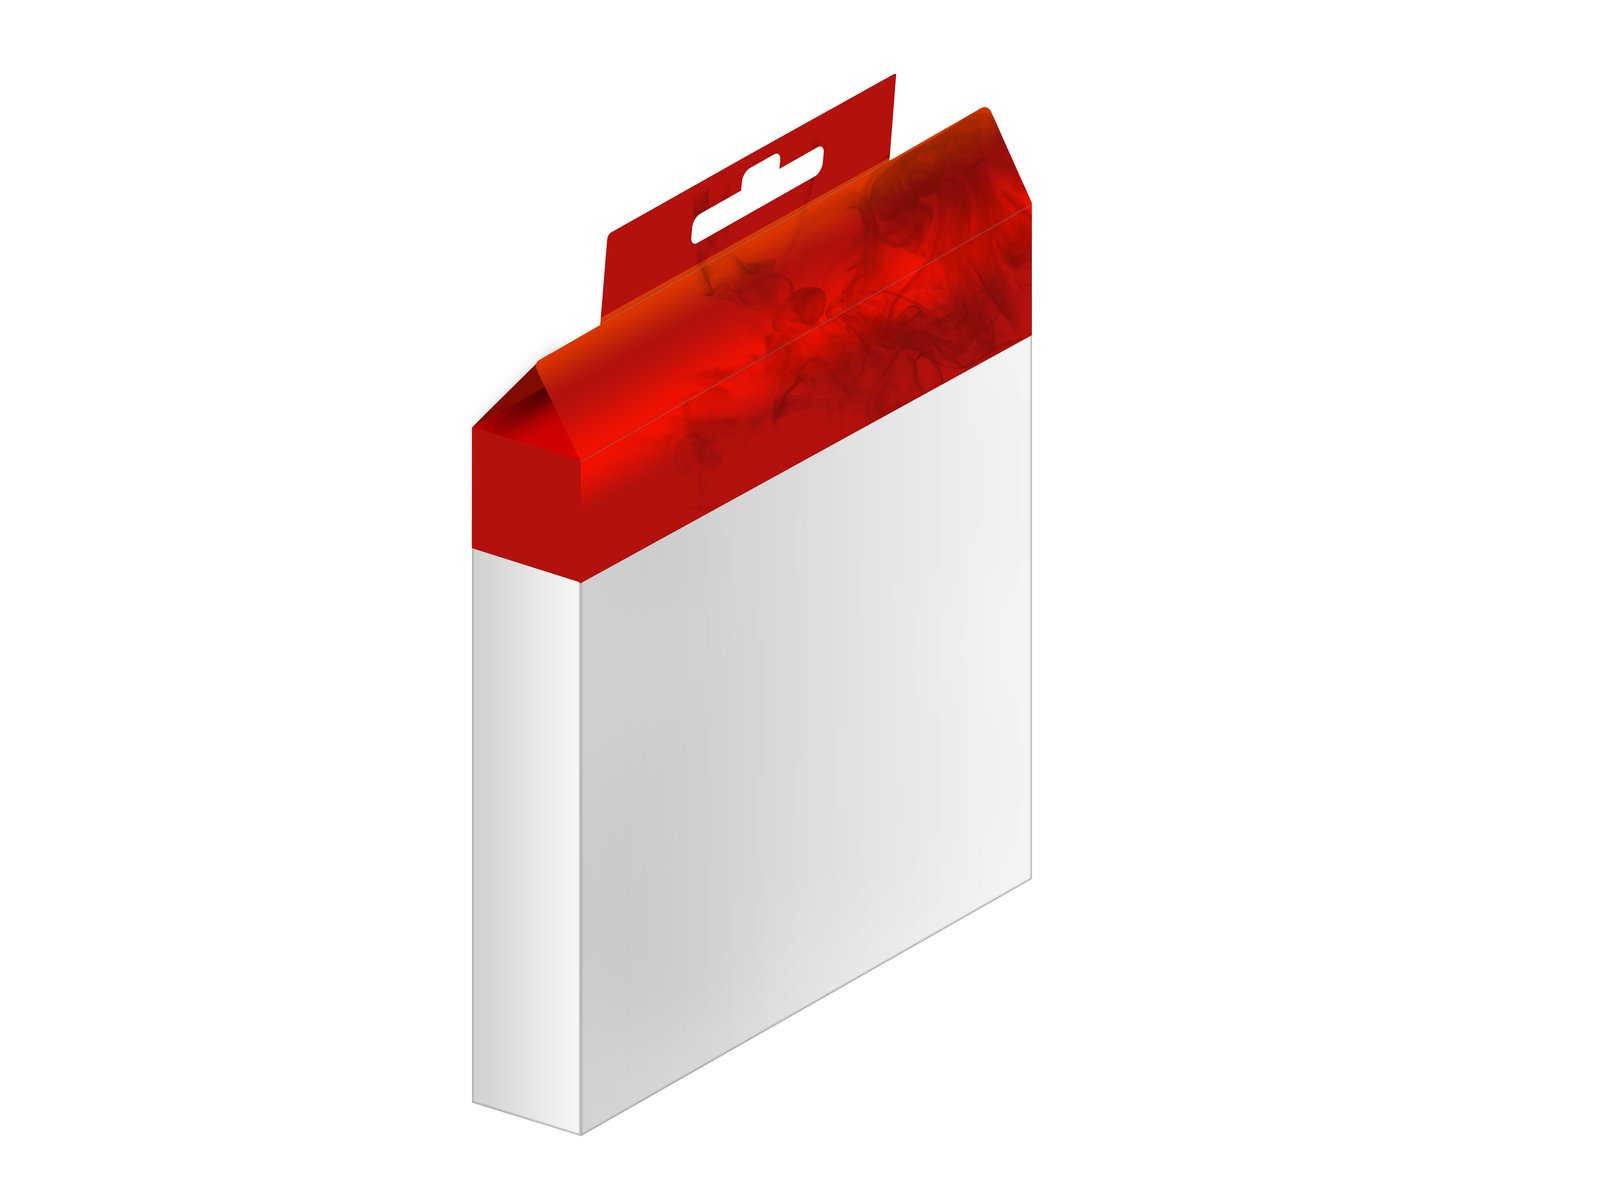 an illustration of a red and white paper folder